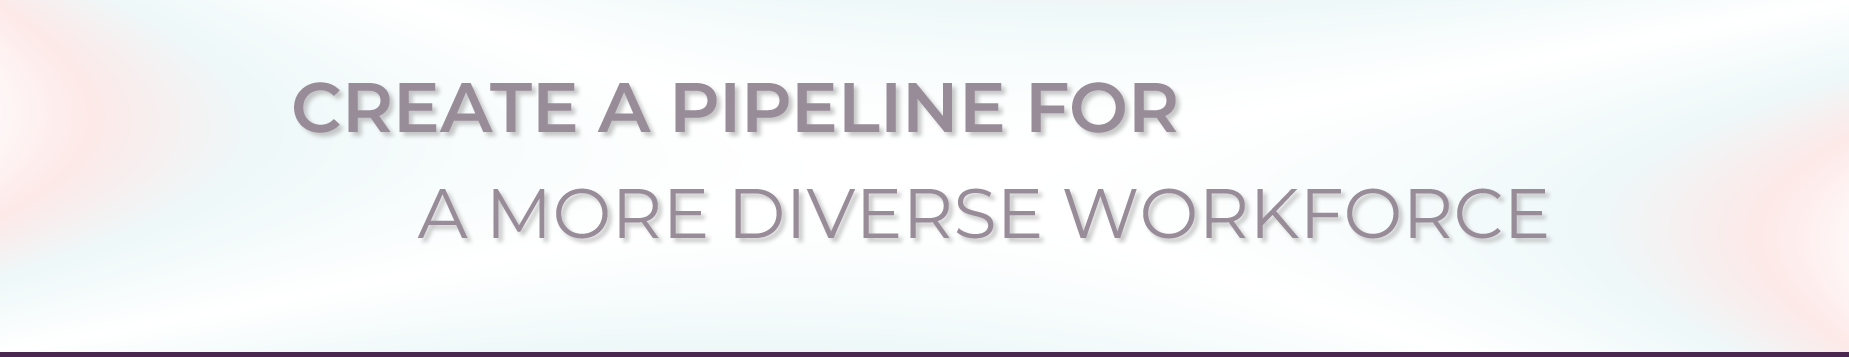 Create a Pipeline for a More Diverse Workforce